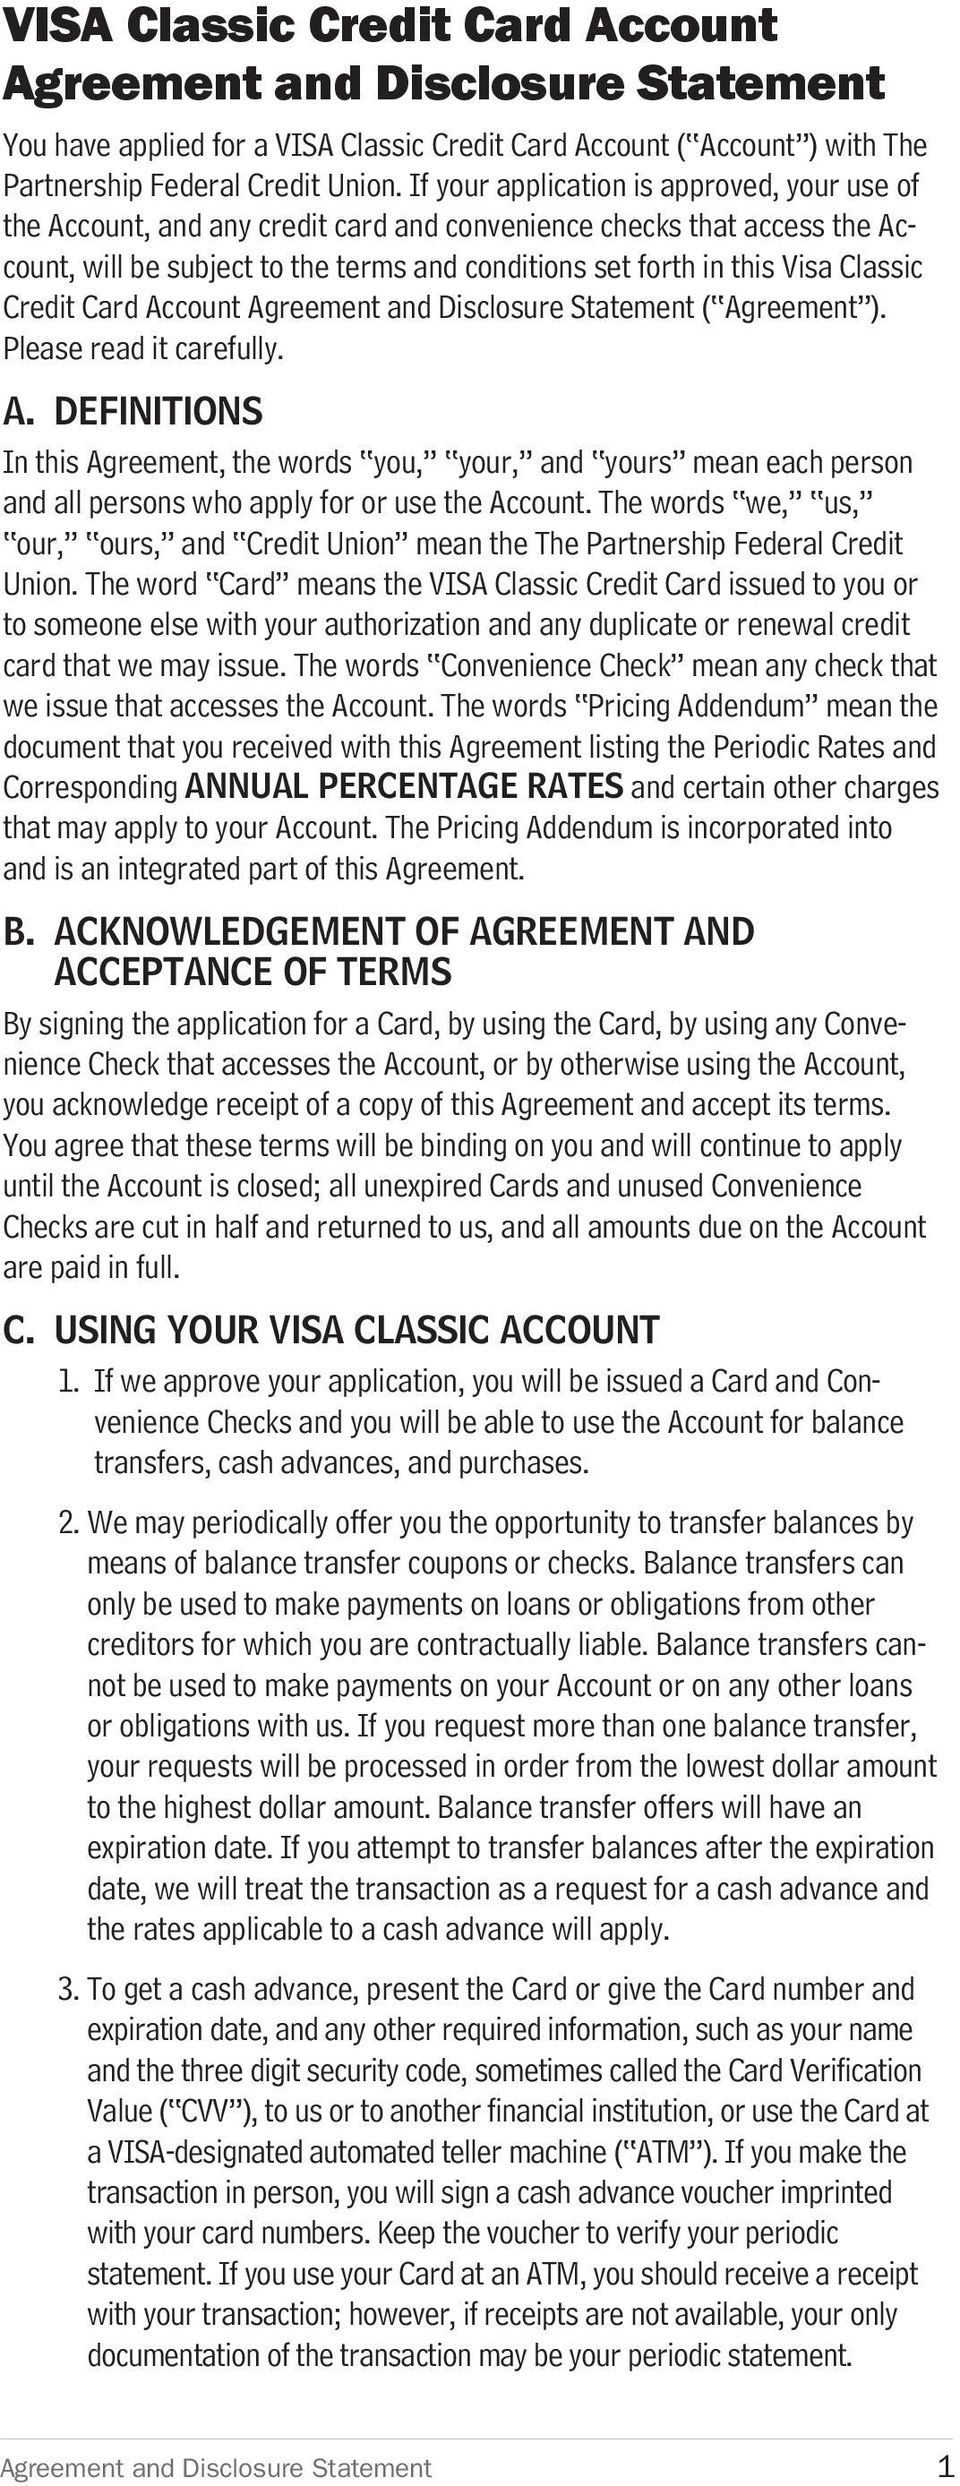 Classic Credit Card Account ( Agreement ). Please read it carefully. A. DEFINITIONS In this Agreement, the words you, your, and yours mean each person and all persons who apply for or use the Account.